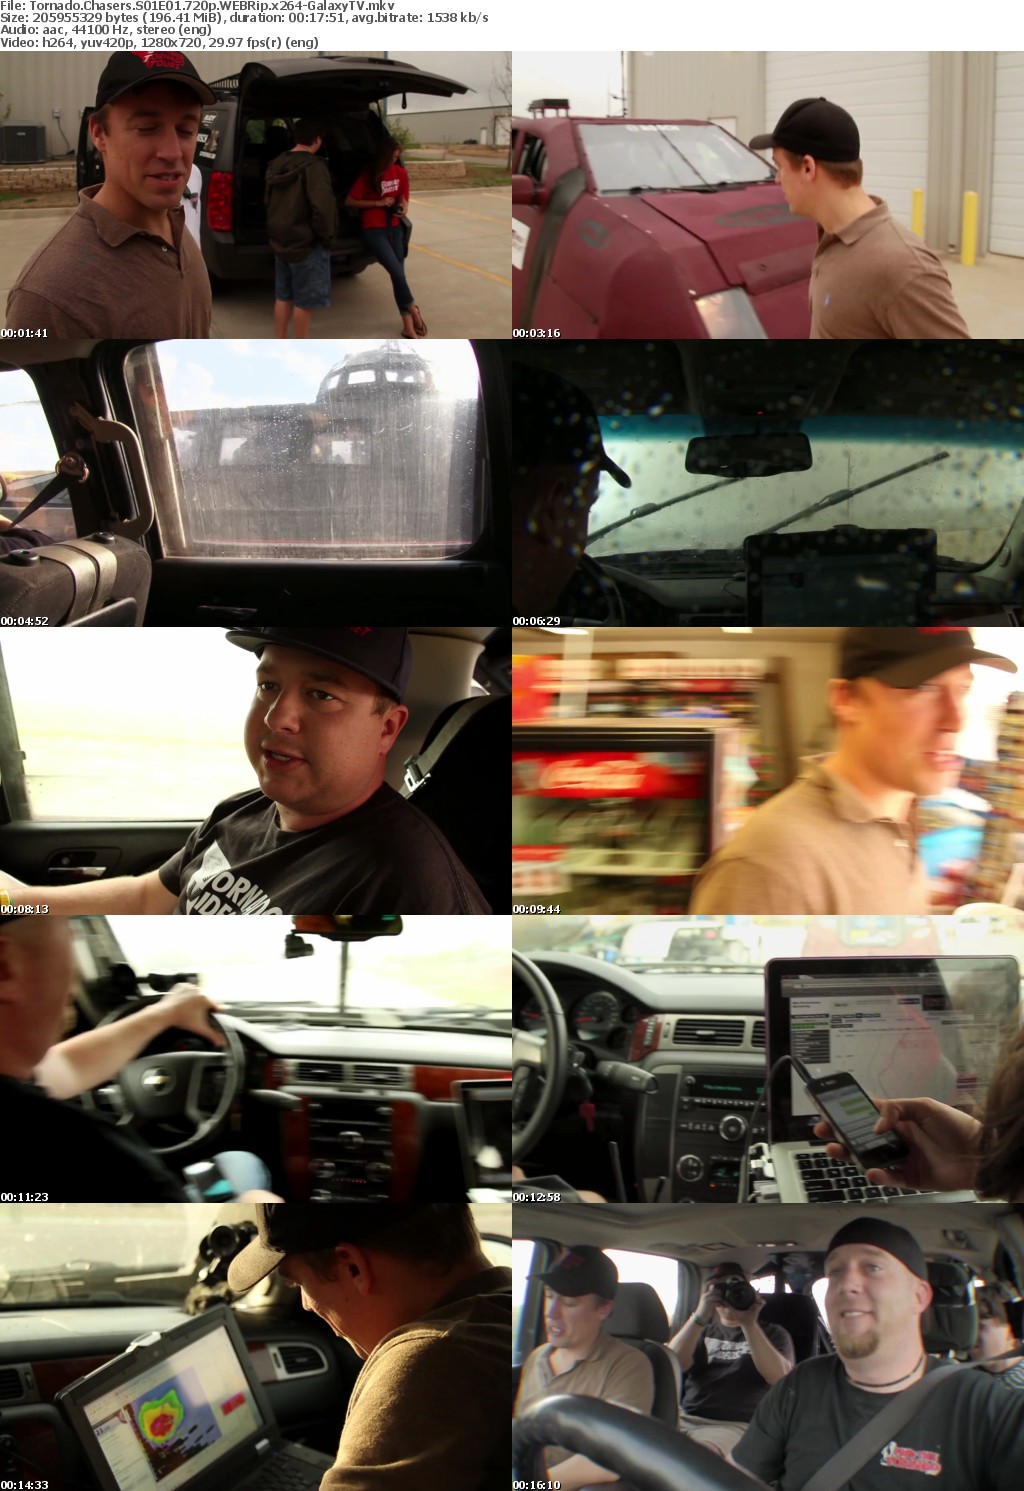 Tornado Chasers S01 COMPLETE 720p WEBRip x264-GalaxyTV